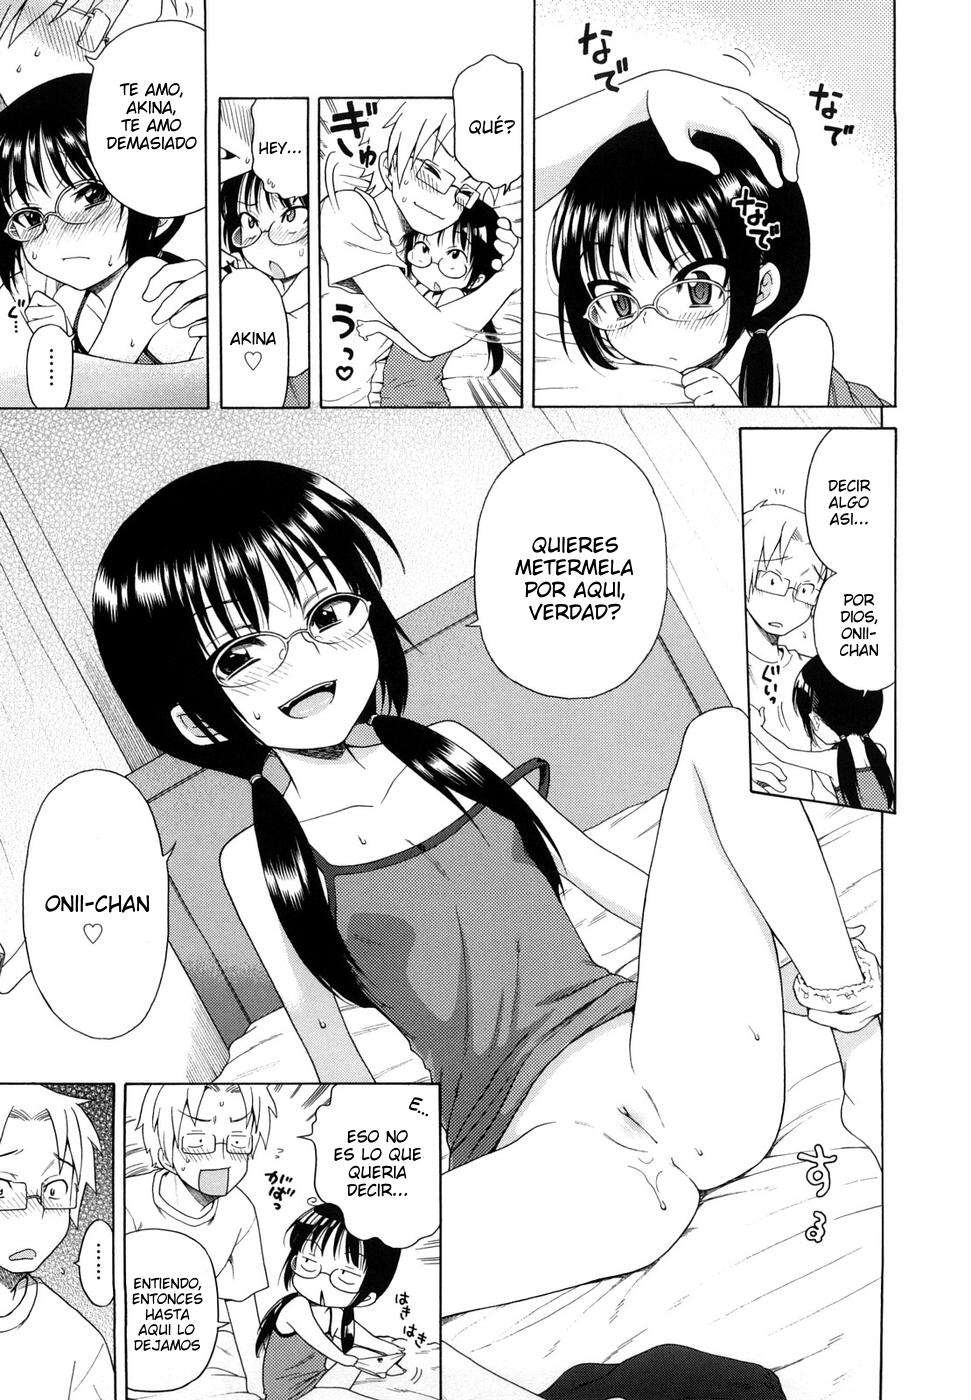 Onii-chan!! Me gustas.. Chapter-10 - 14